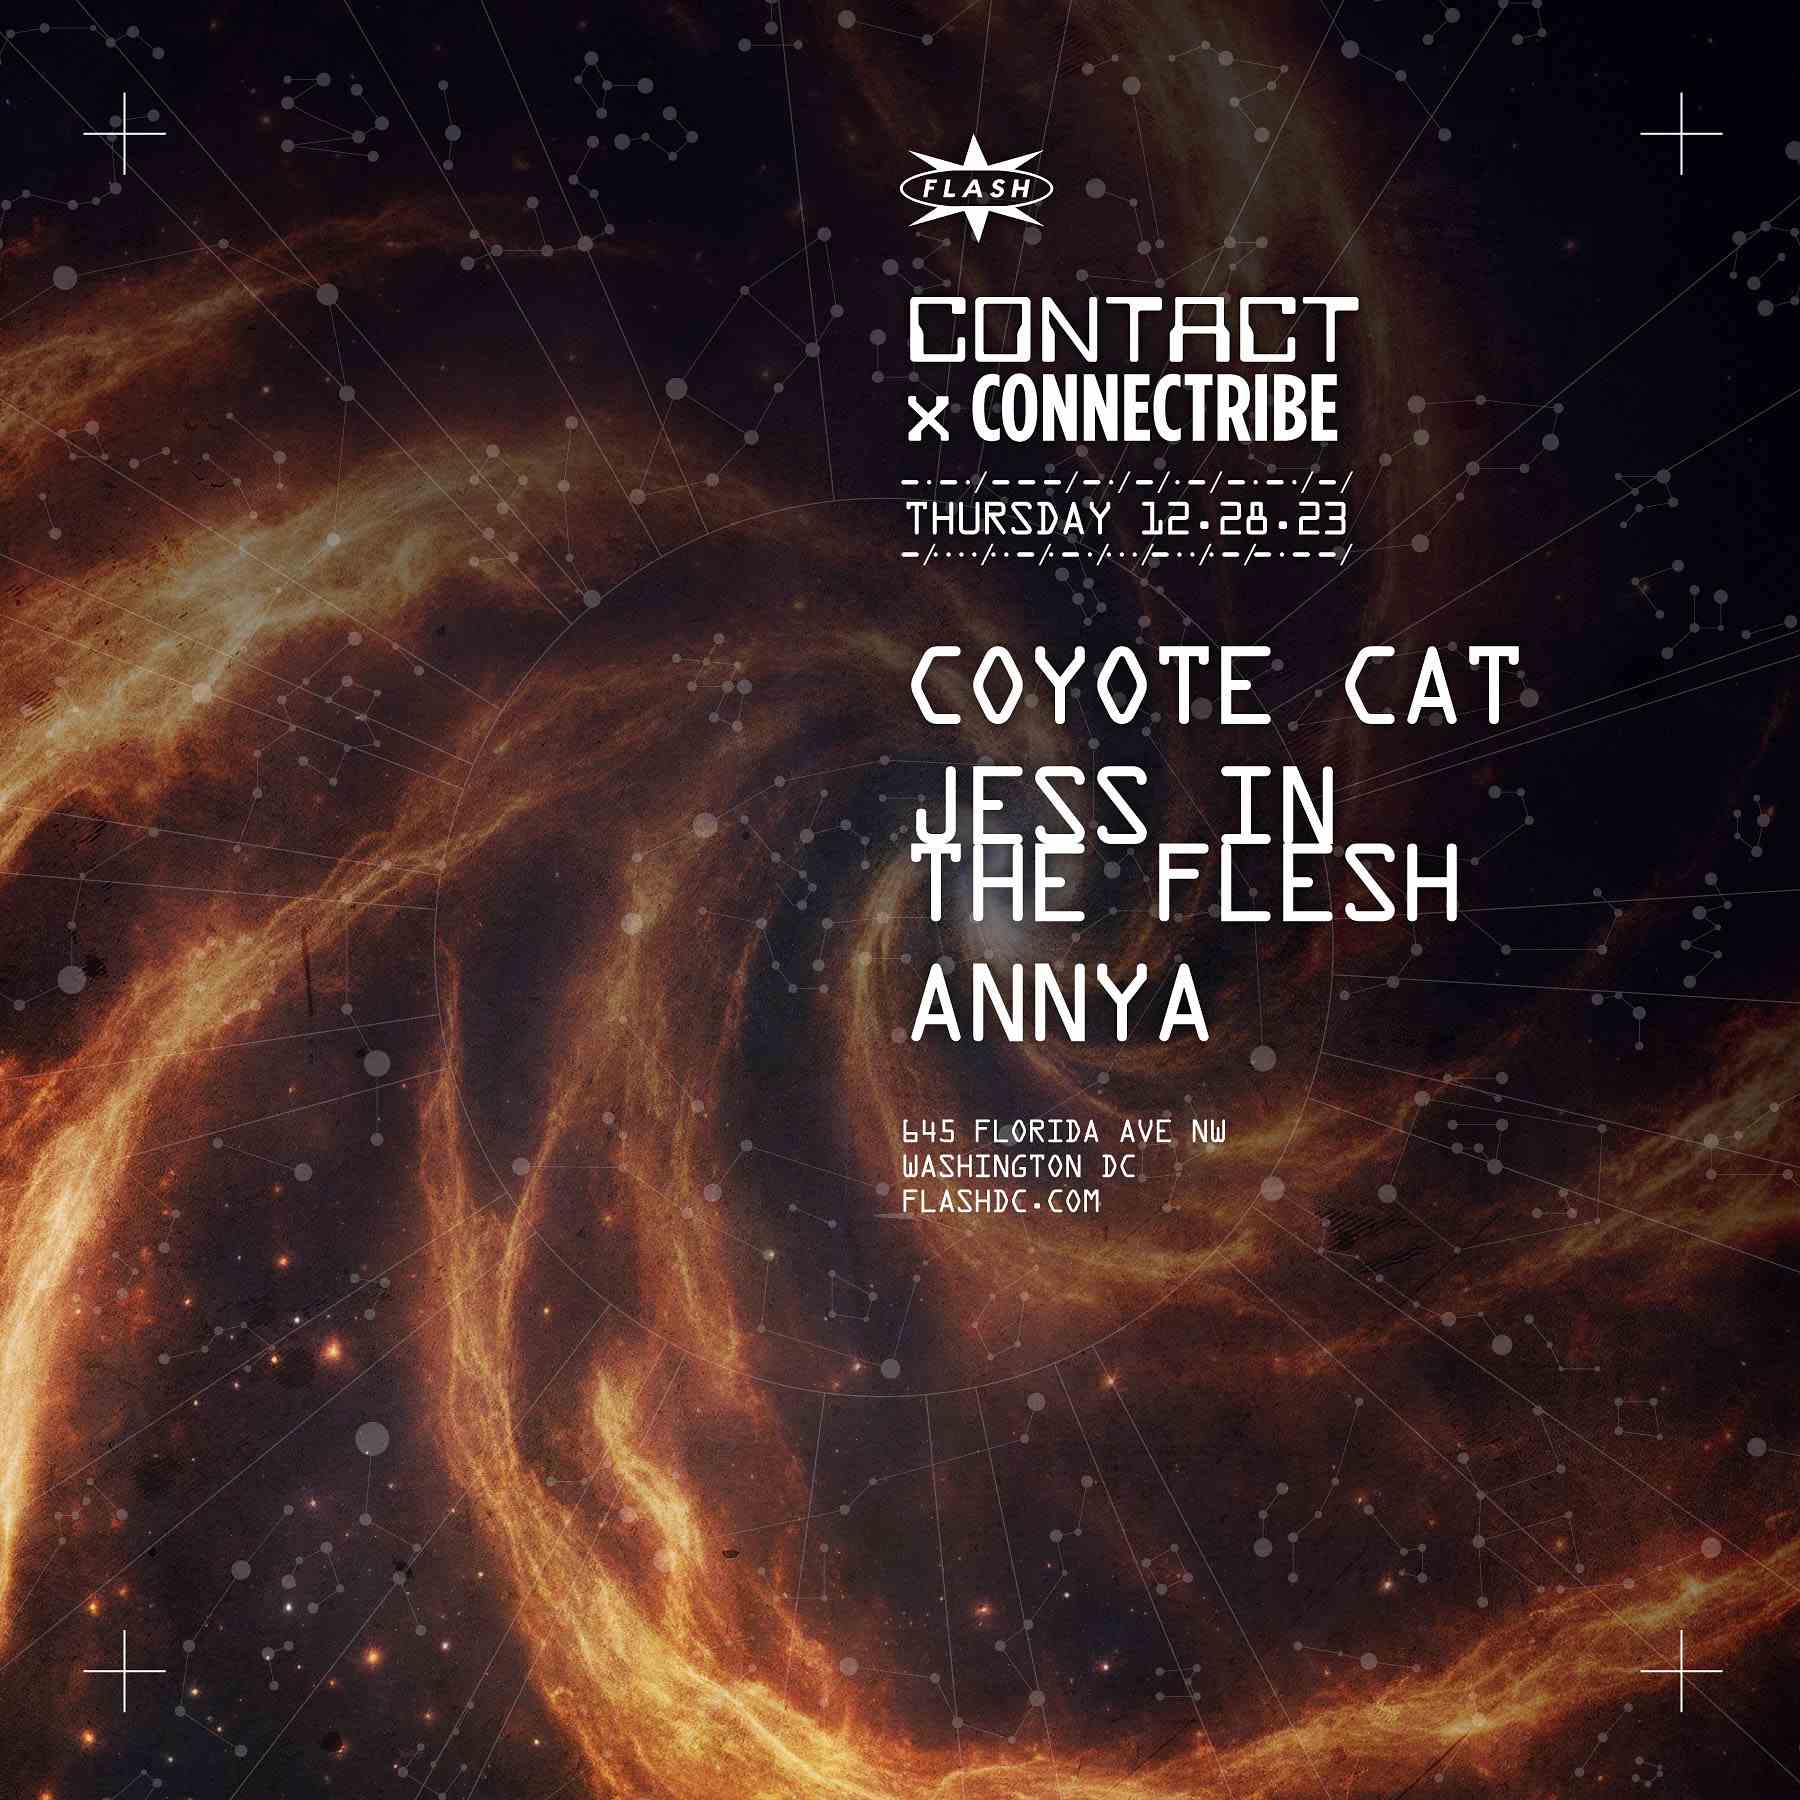 CONTACT: Connectribe event flyer